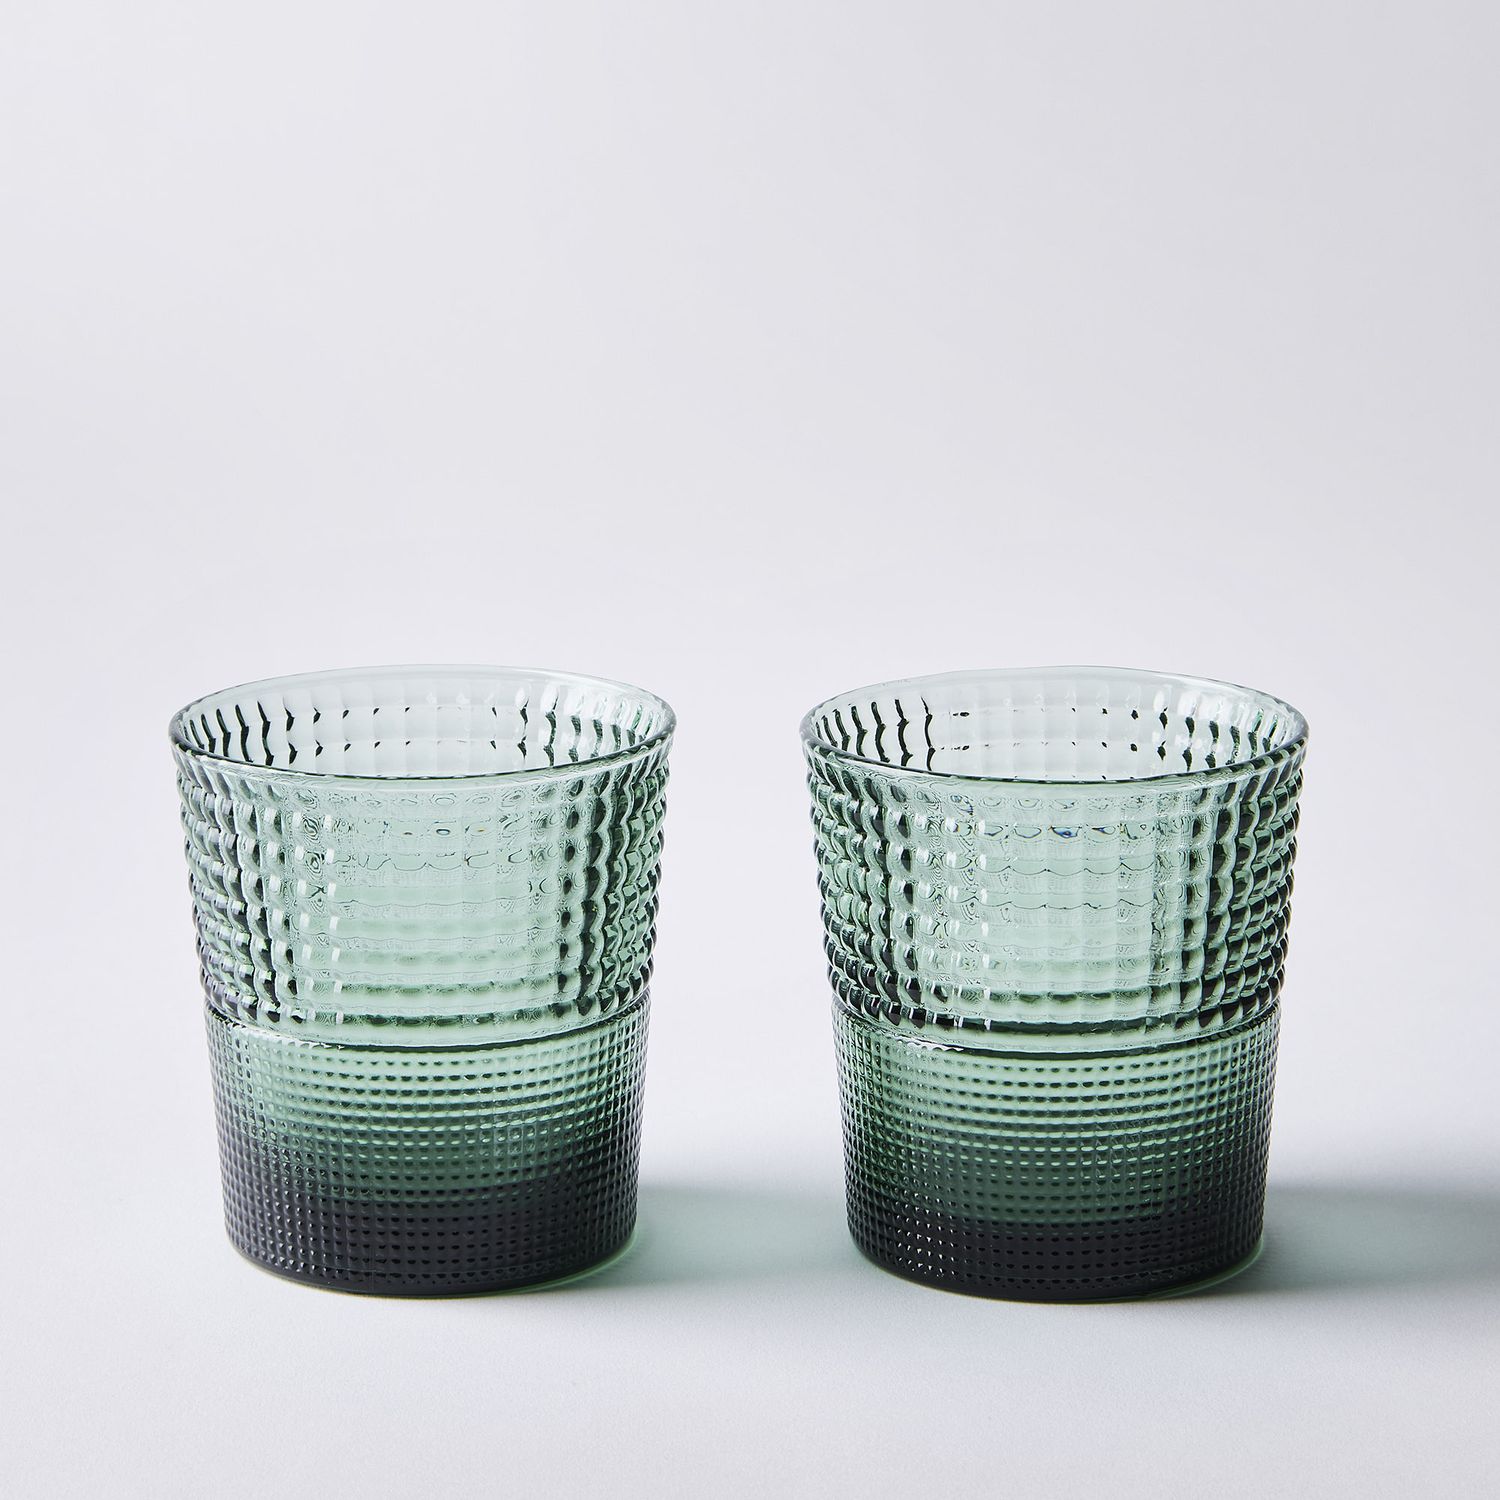 IVV Italian Retro Glass Tumblers, Set of 2, Mouth-Blown